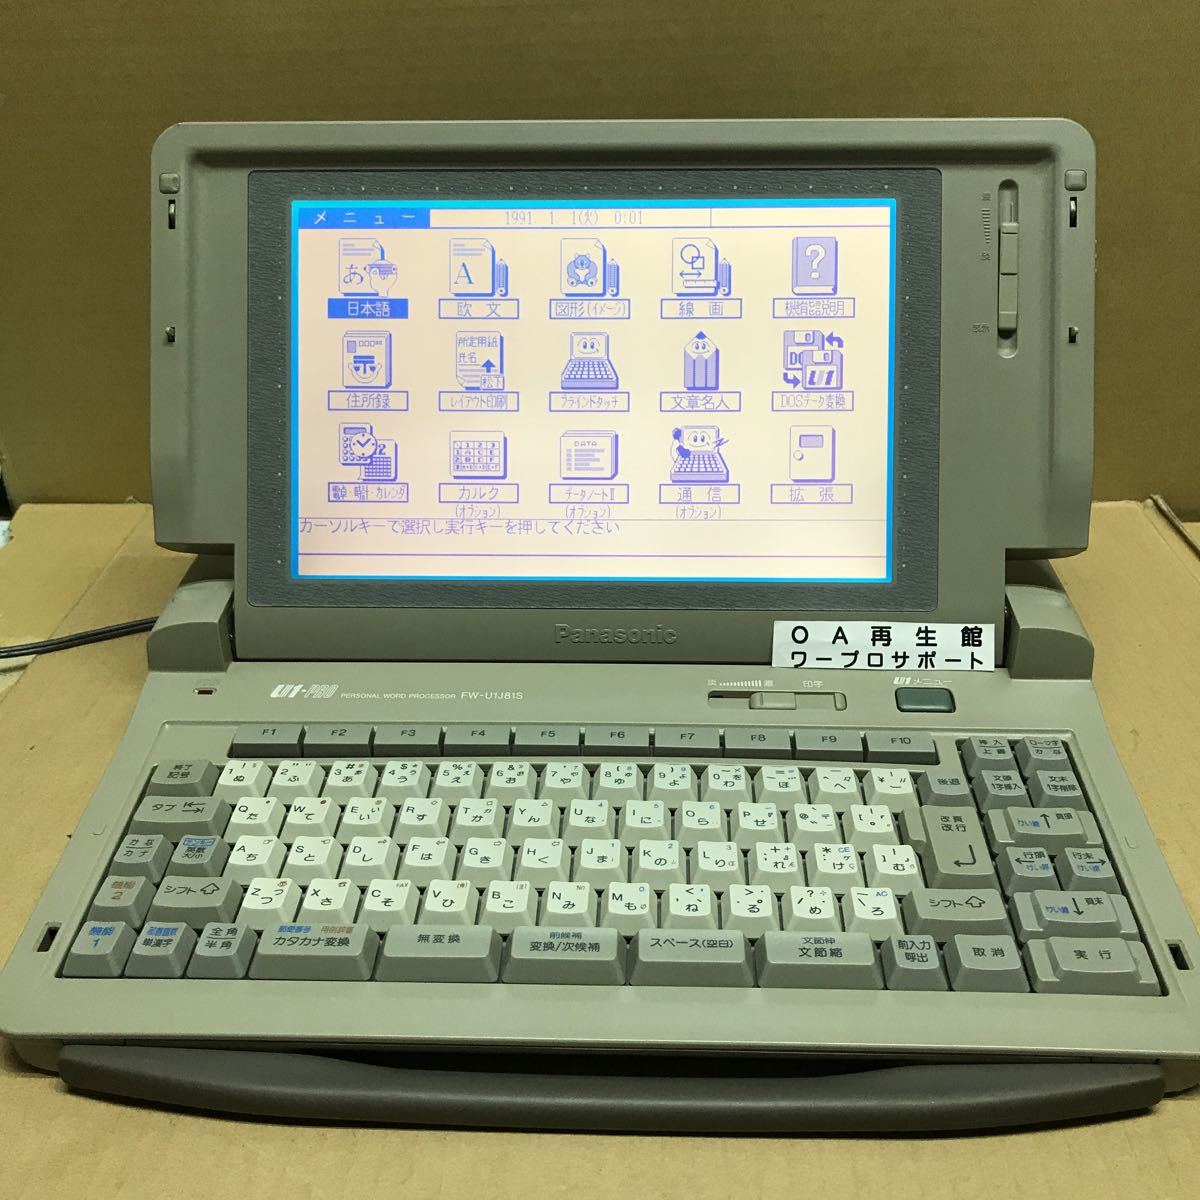 K2374 Panasonic word-processor FW-U1J81S service being completed 3 months guarantee equipped 